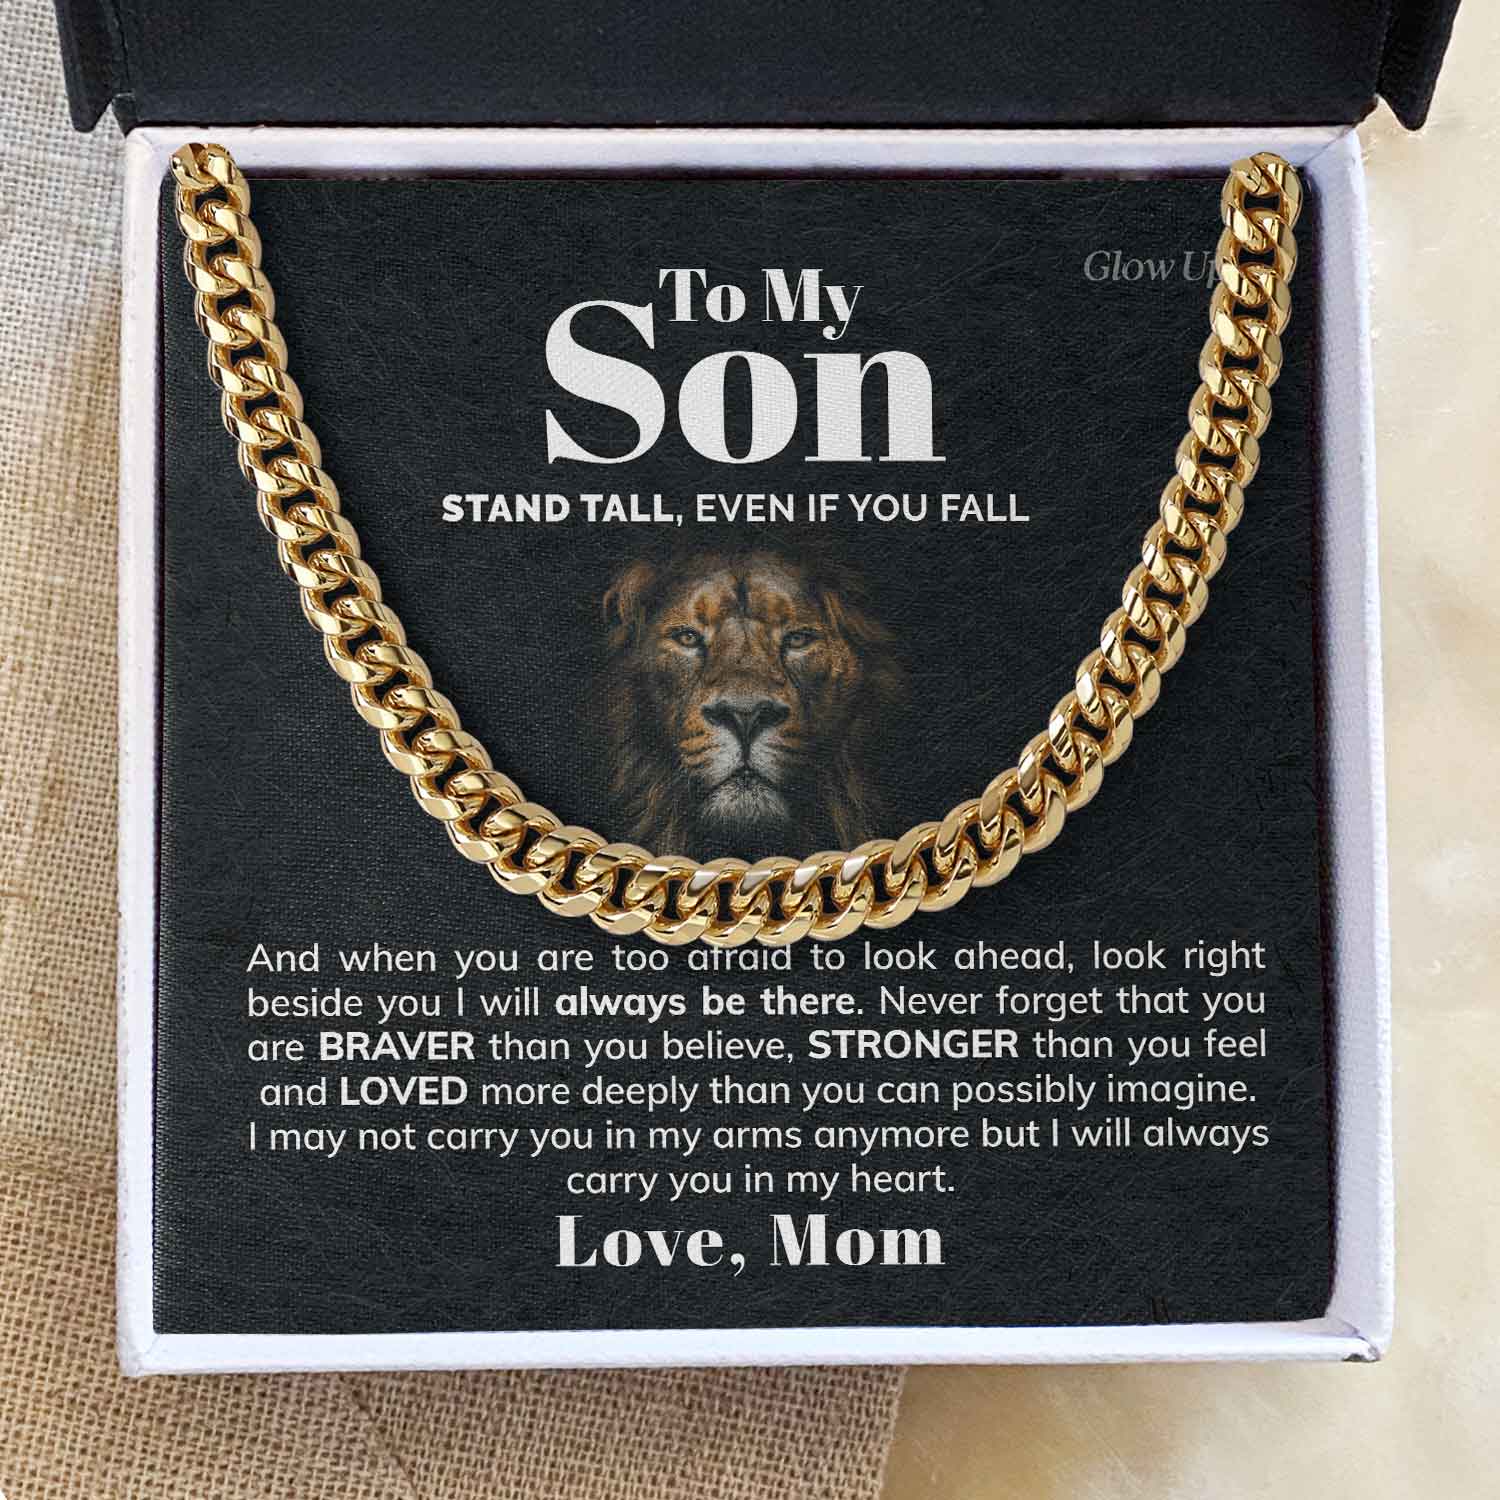 ShineOn Fulfillment Jewelry 14K Yellow Gold Finish / Two-Toned Box To My Son - I carry you in my heart - Cuban Link Chain